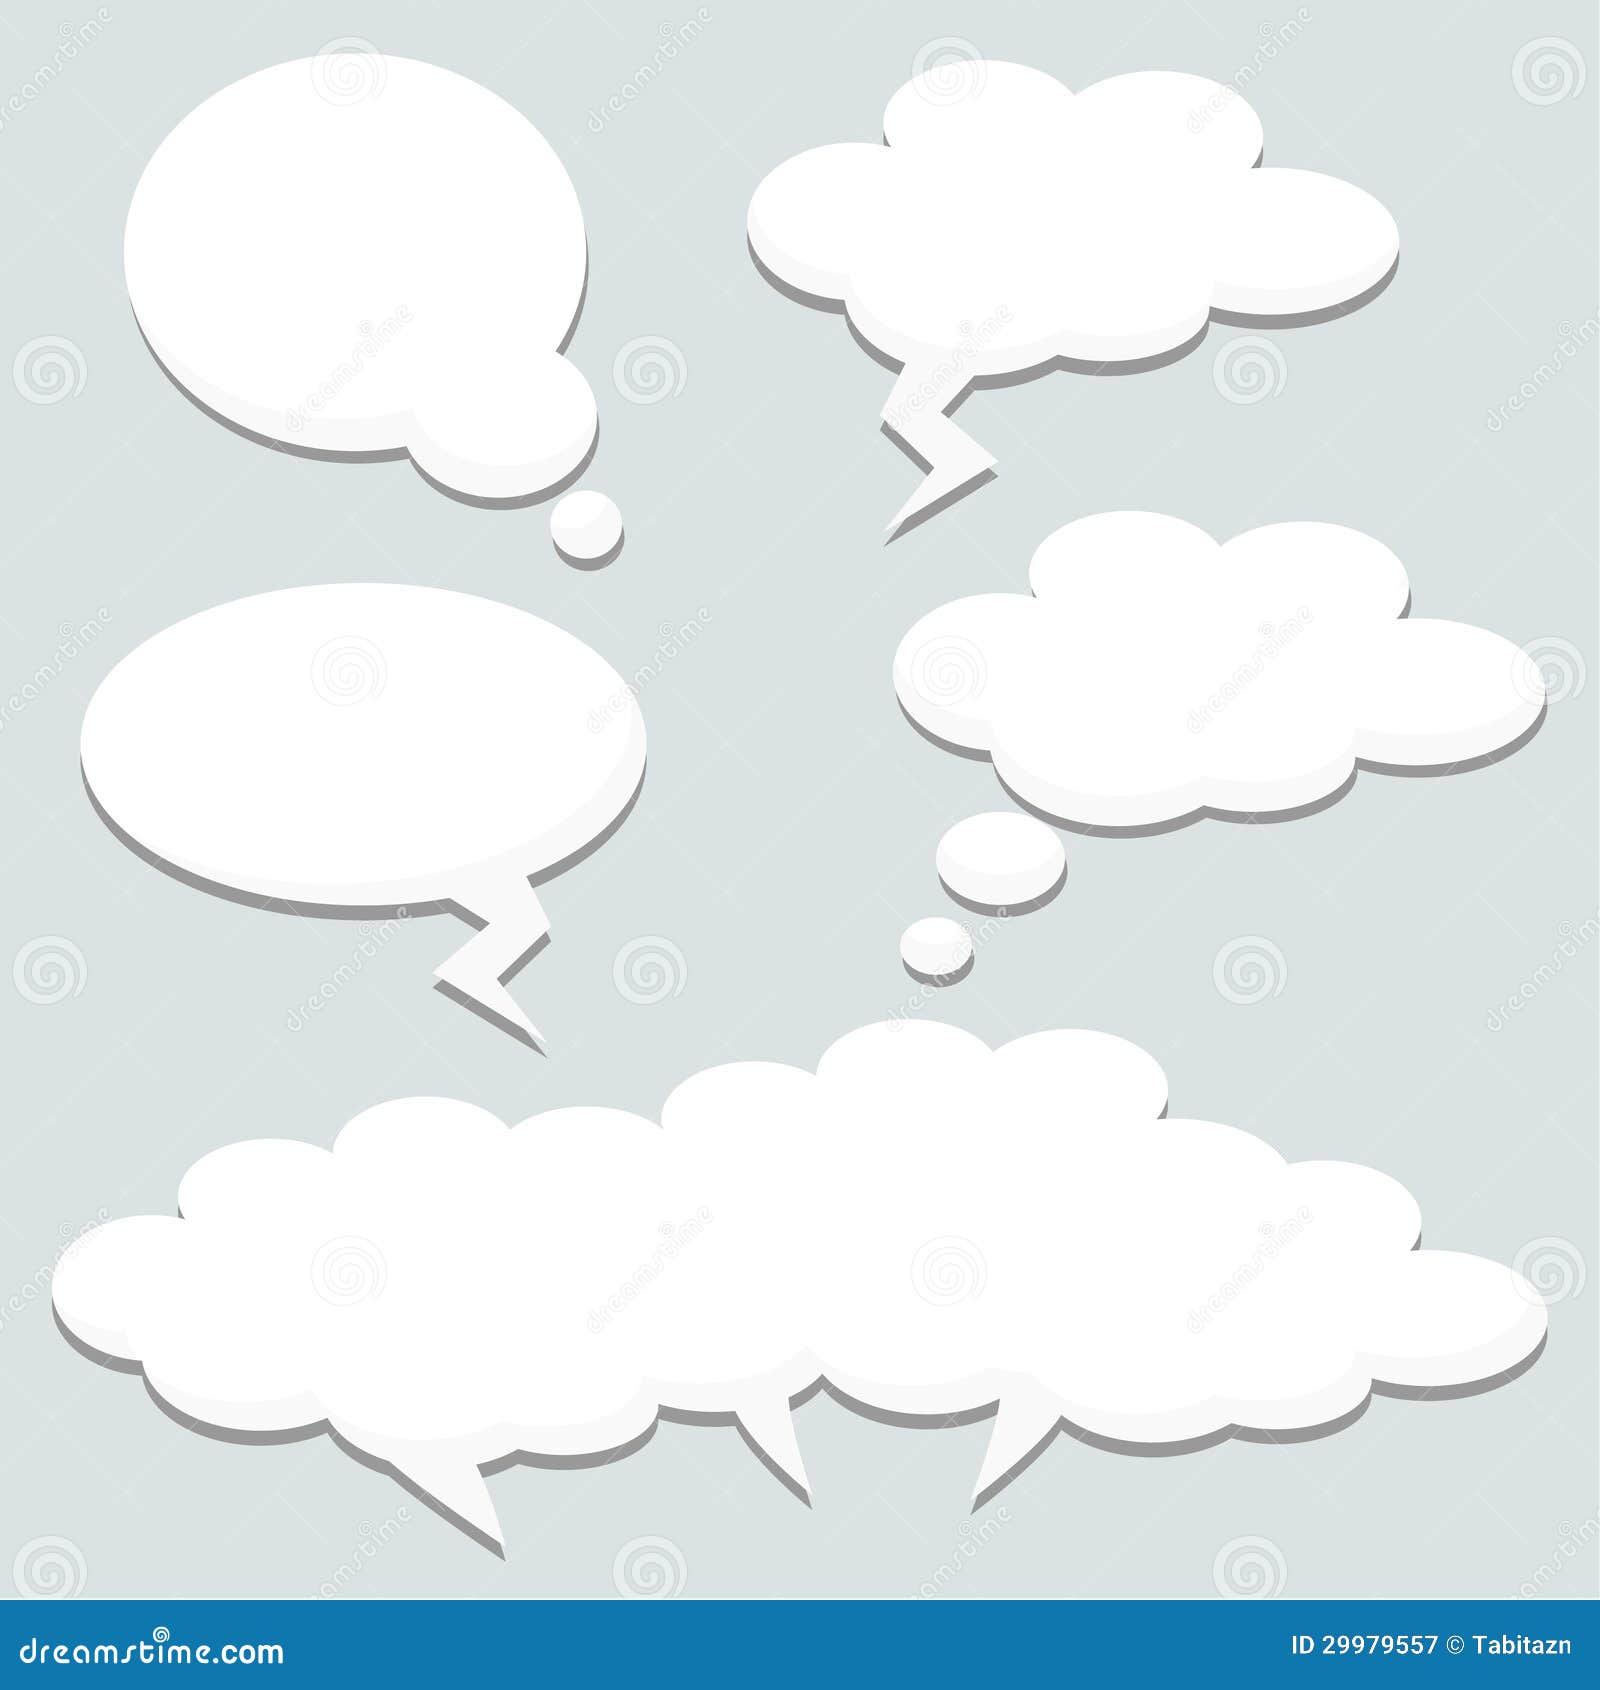 speech thought bubbles, clouds, 